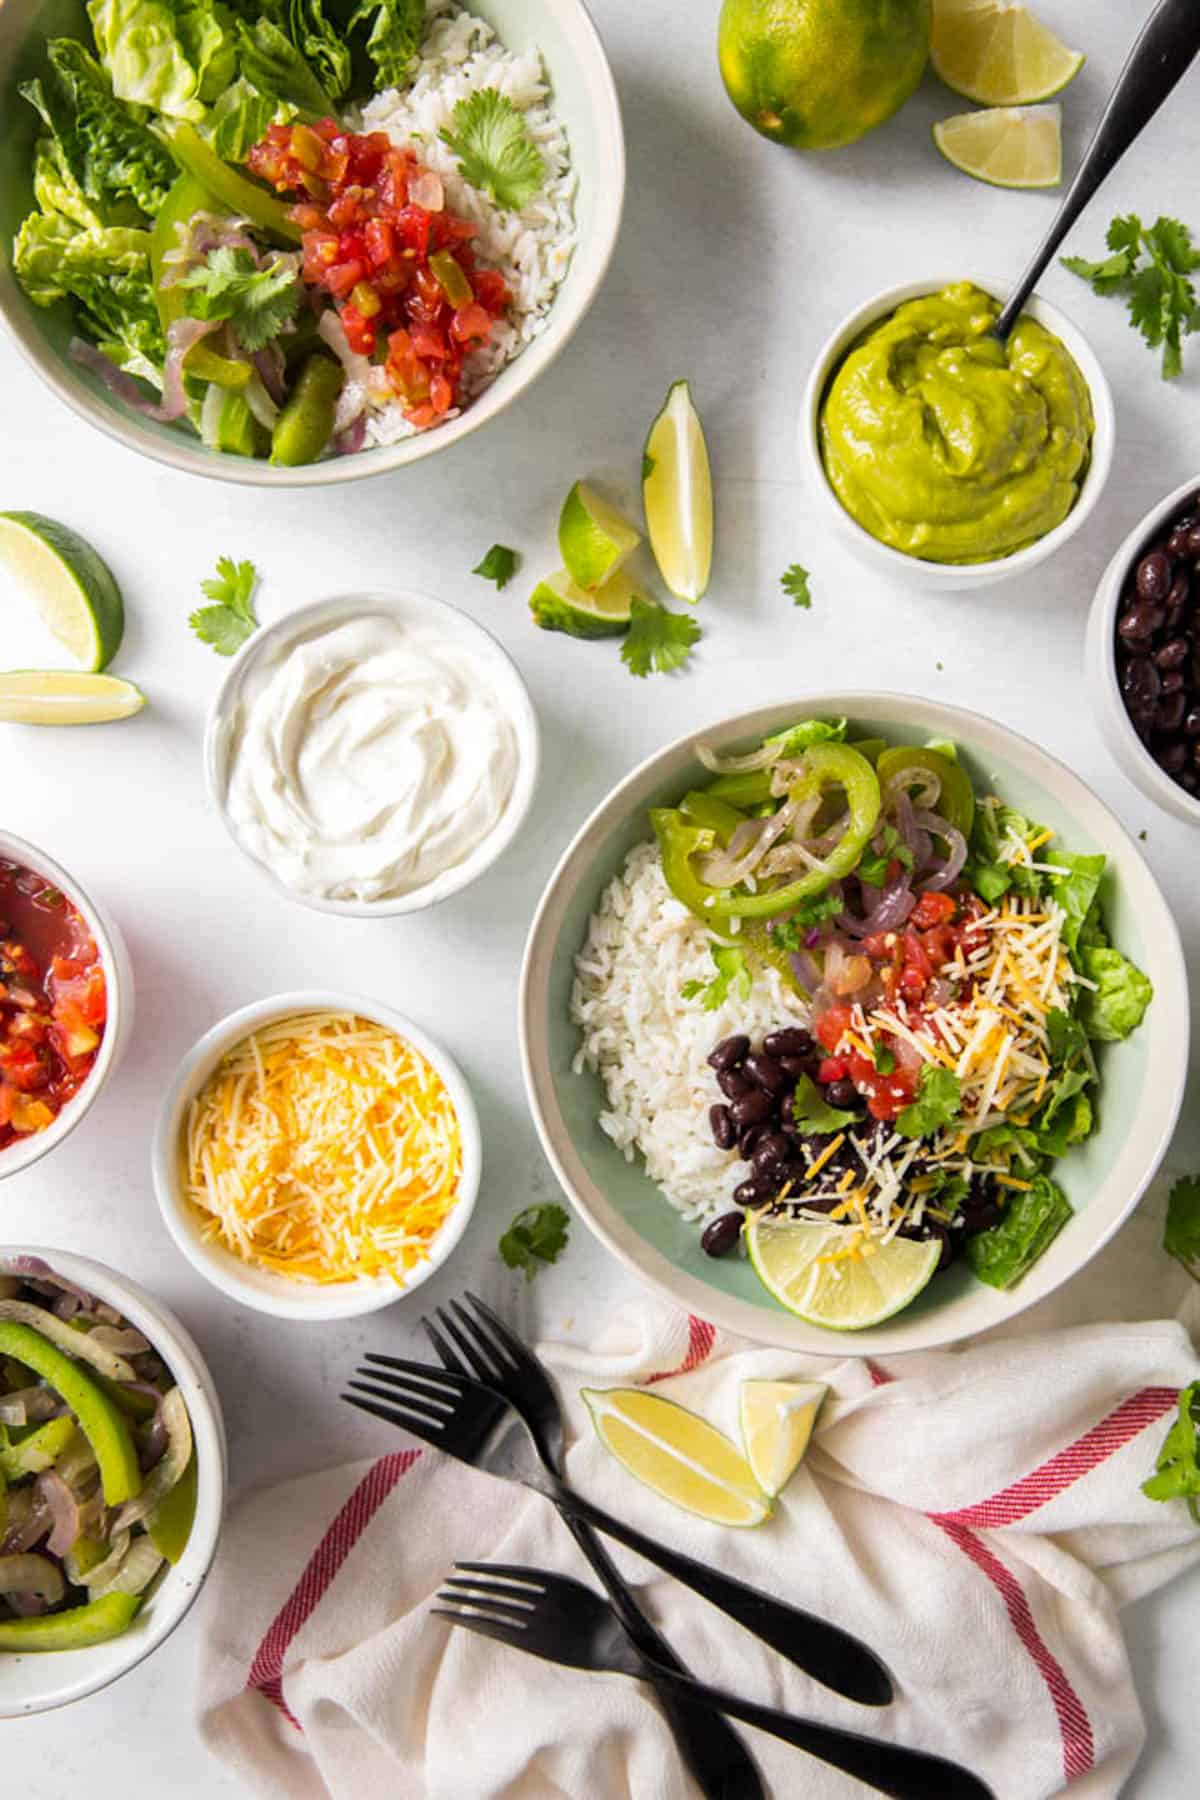 Two veggie burrito bowls sitting on a white countertop with small bowls of additional toppings including guacamole, sour cream, cheese and salsa.